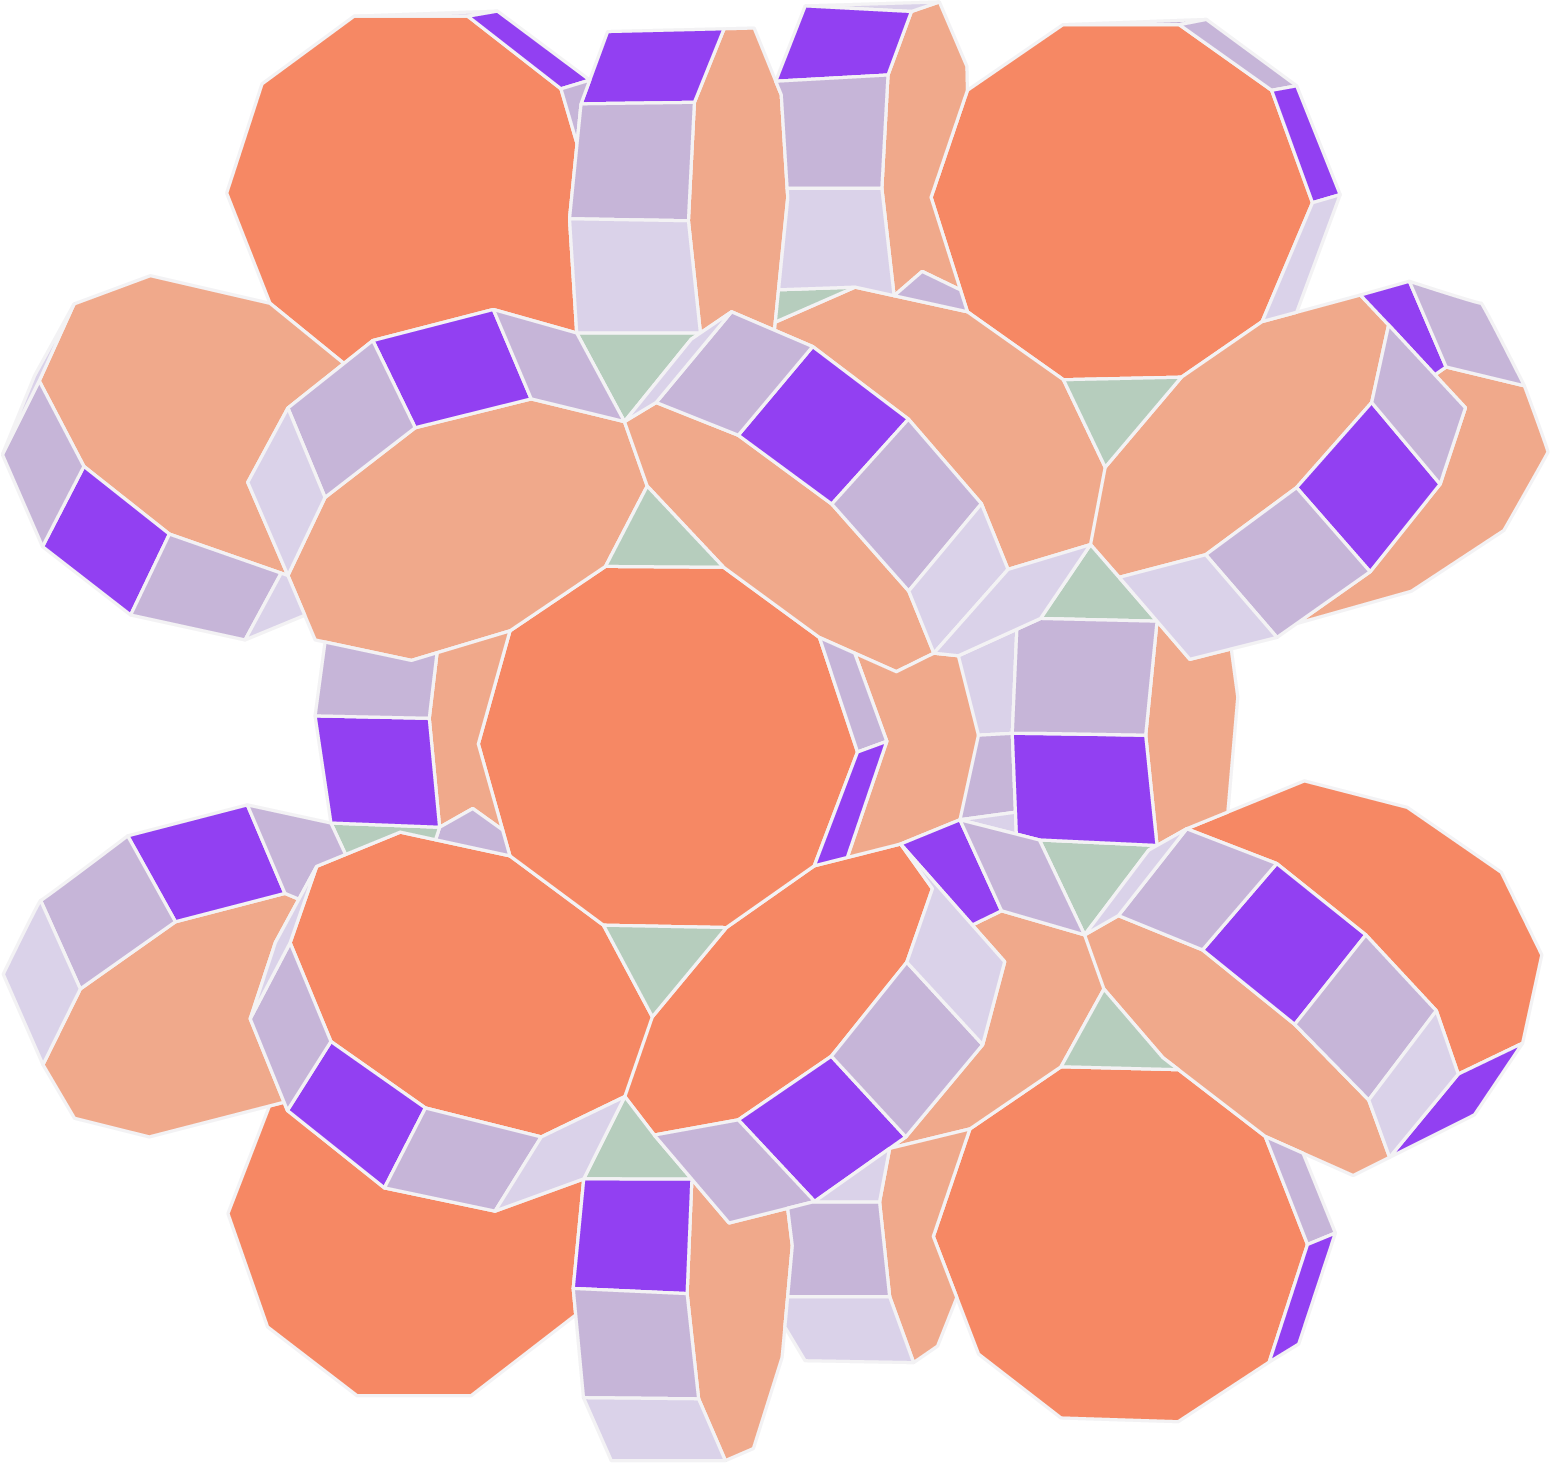 A geometric pattern of orange and purple circles on a white background